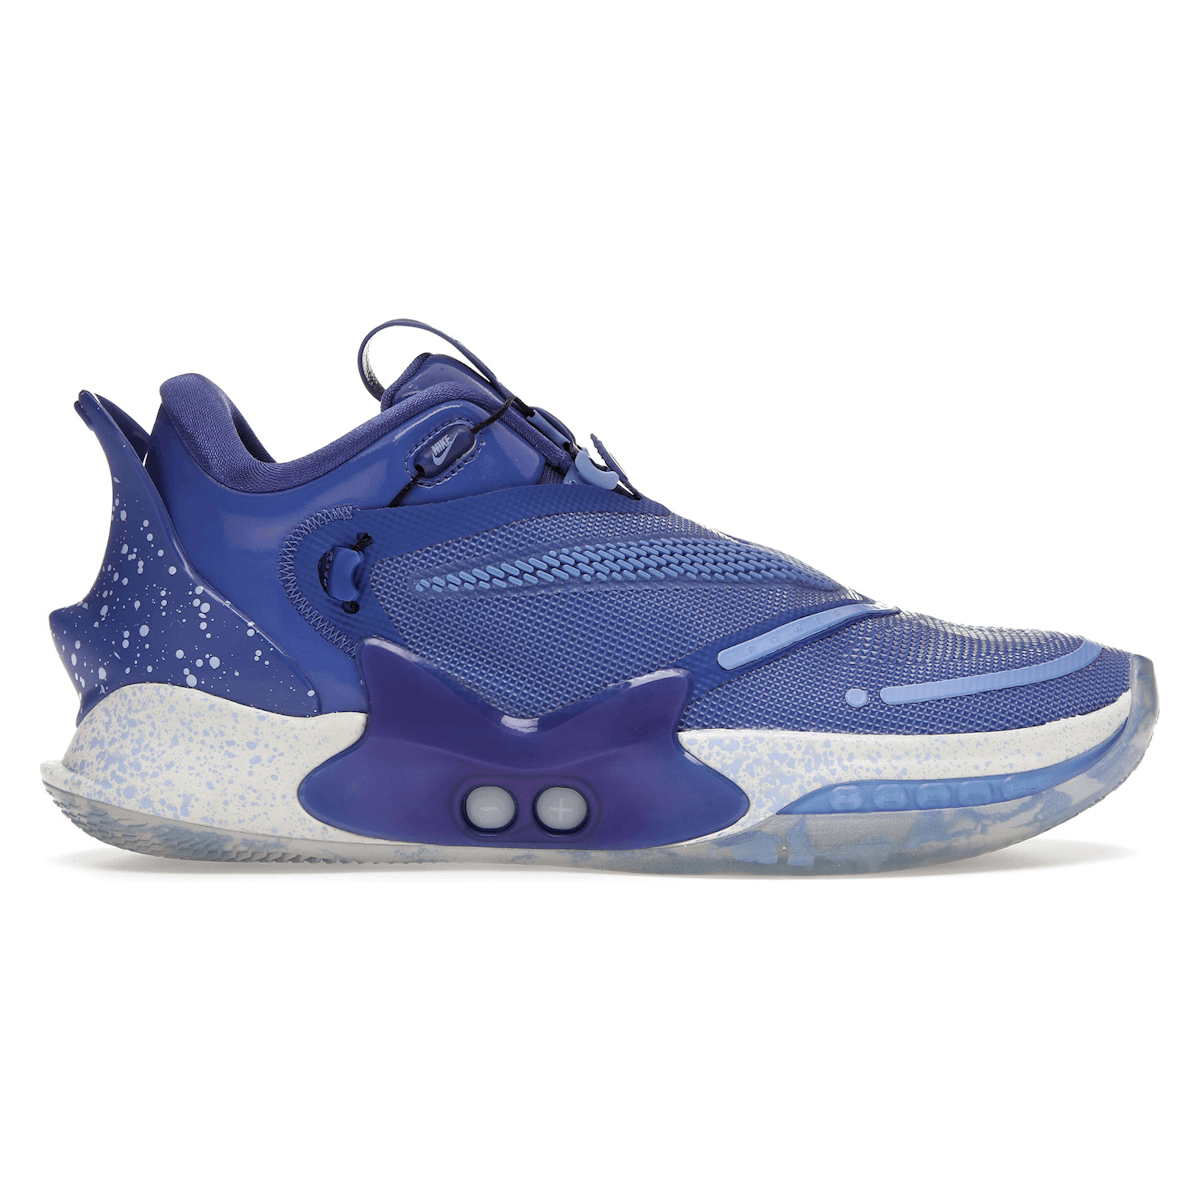 Nike Adapt BB 2.0 Astronomy Blue (US Charger)